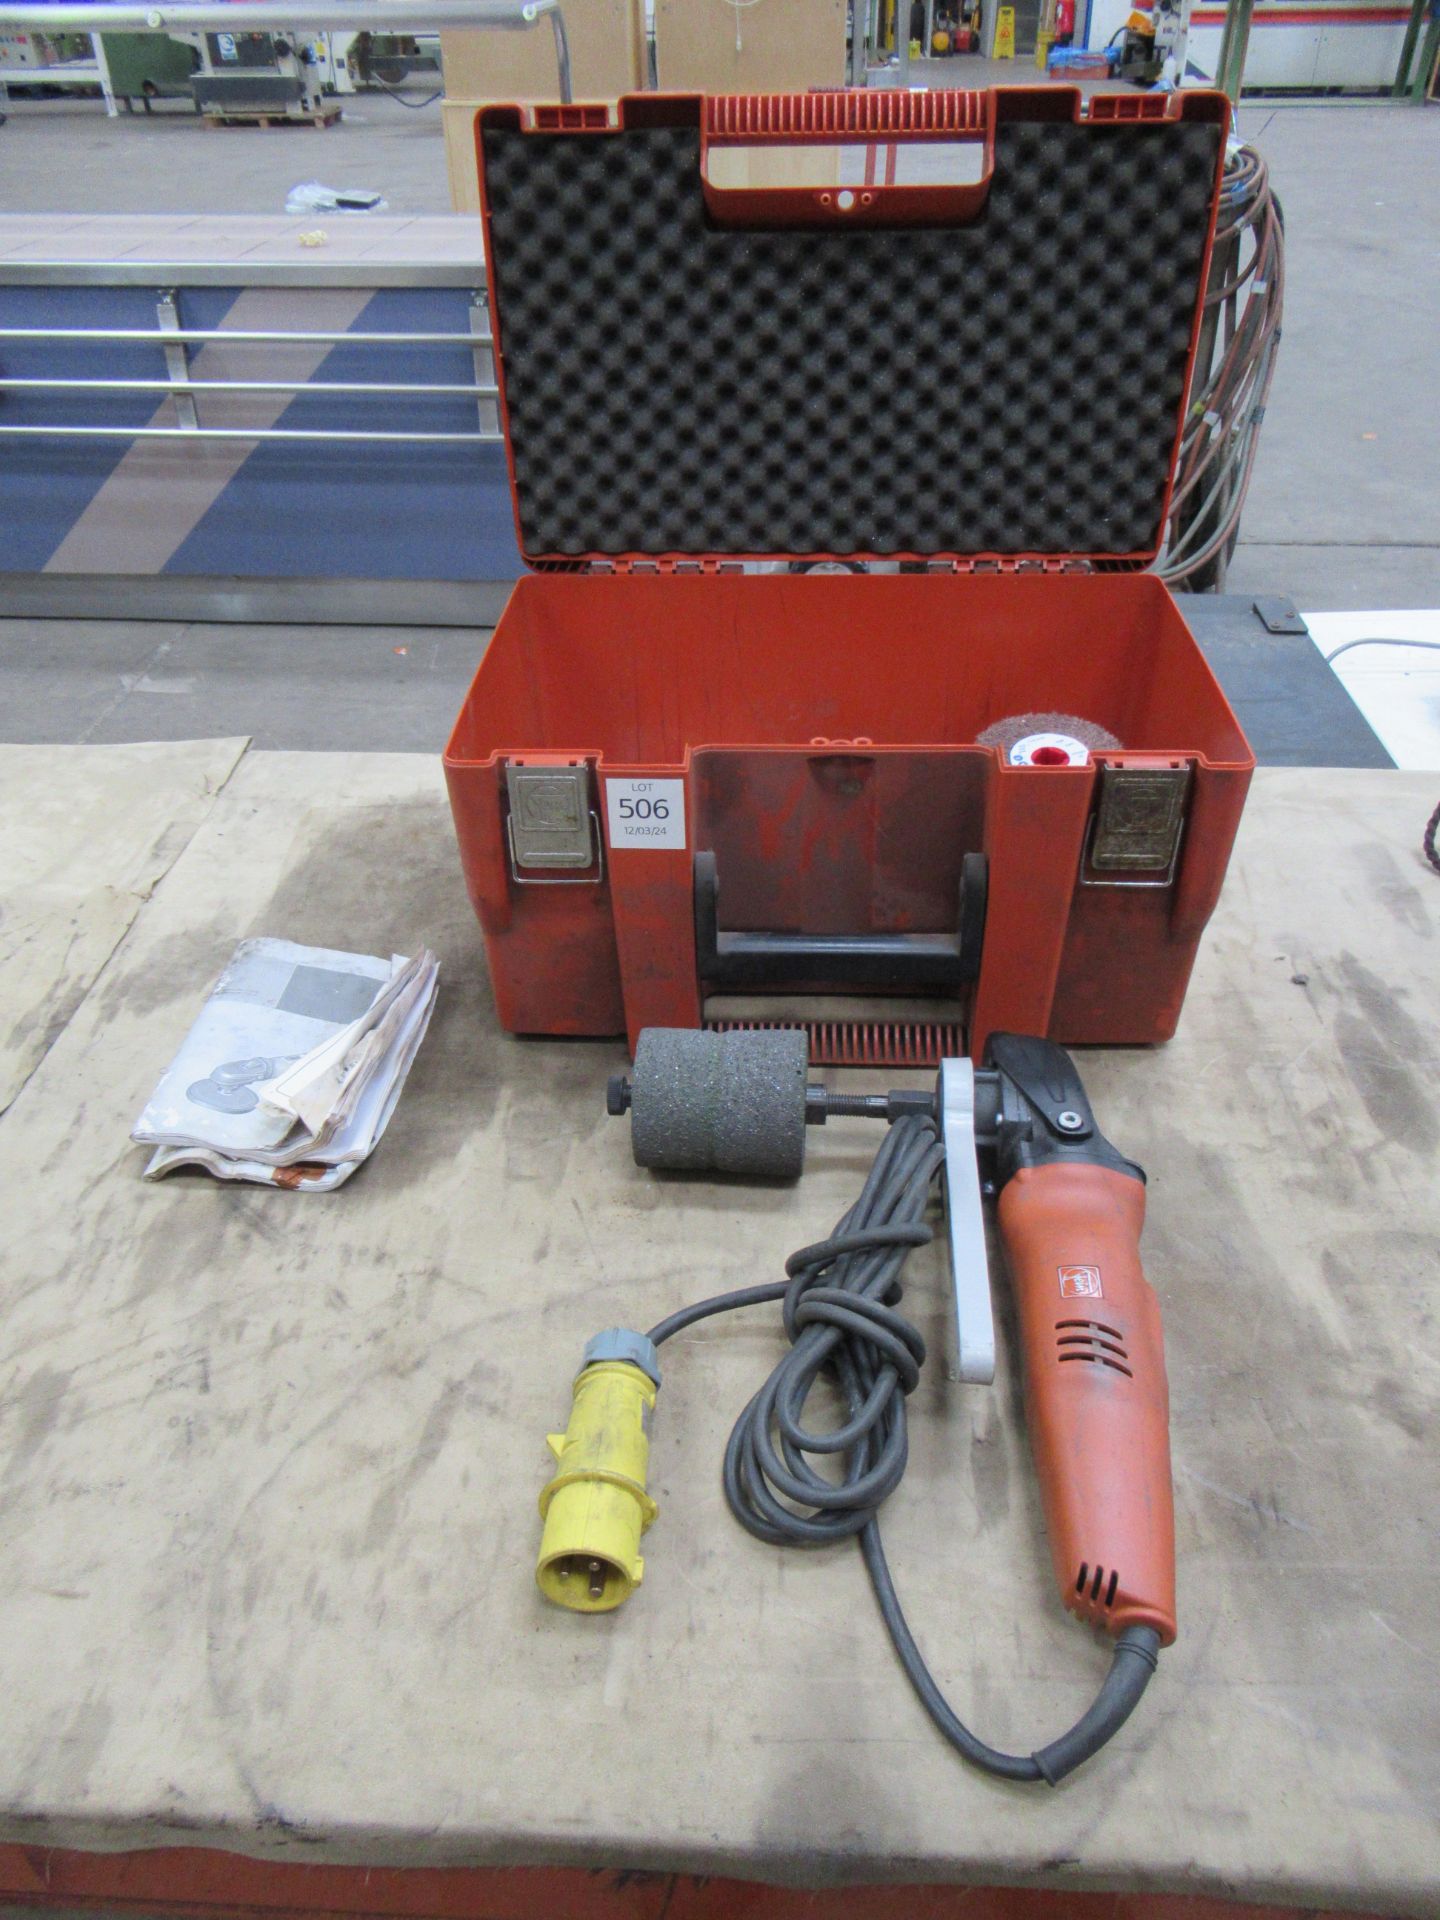 A Fein 110V Hand Sander/Polisher Multi-Tool with carry case